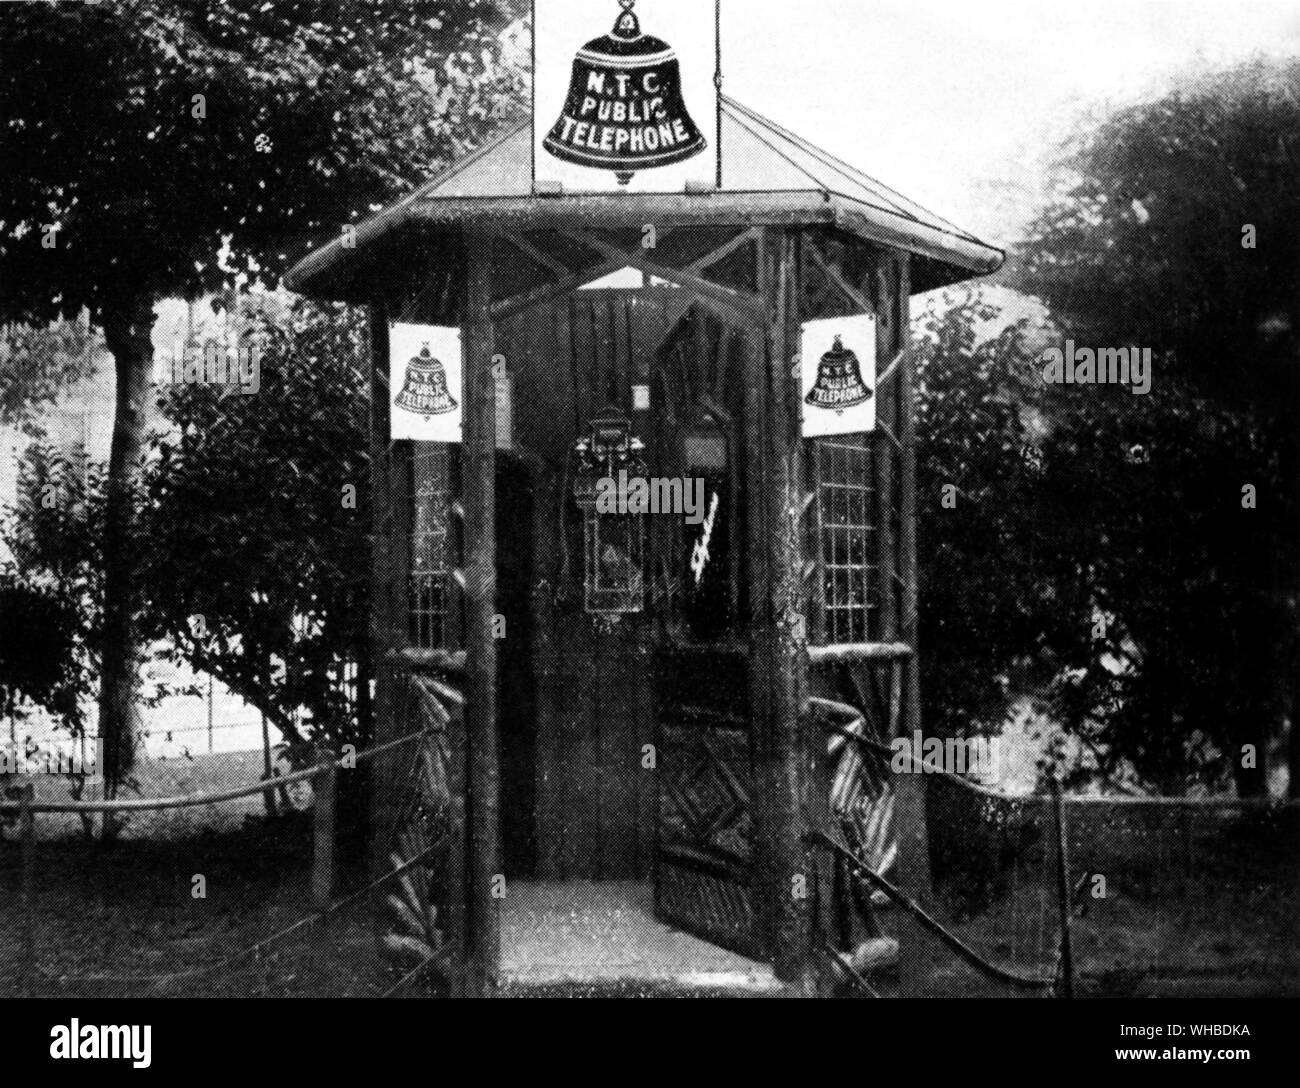 An early National Telephone Co. (NTC) kiosk, designed to blend with its environment - rustic arbour pattern Folkestone 1910. Stock Photo